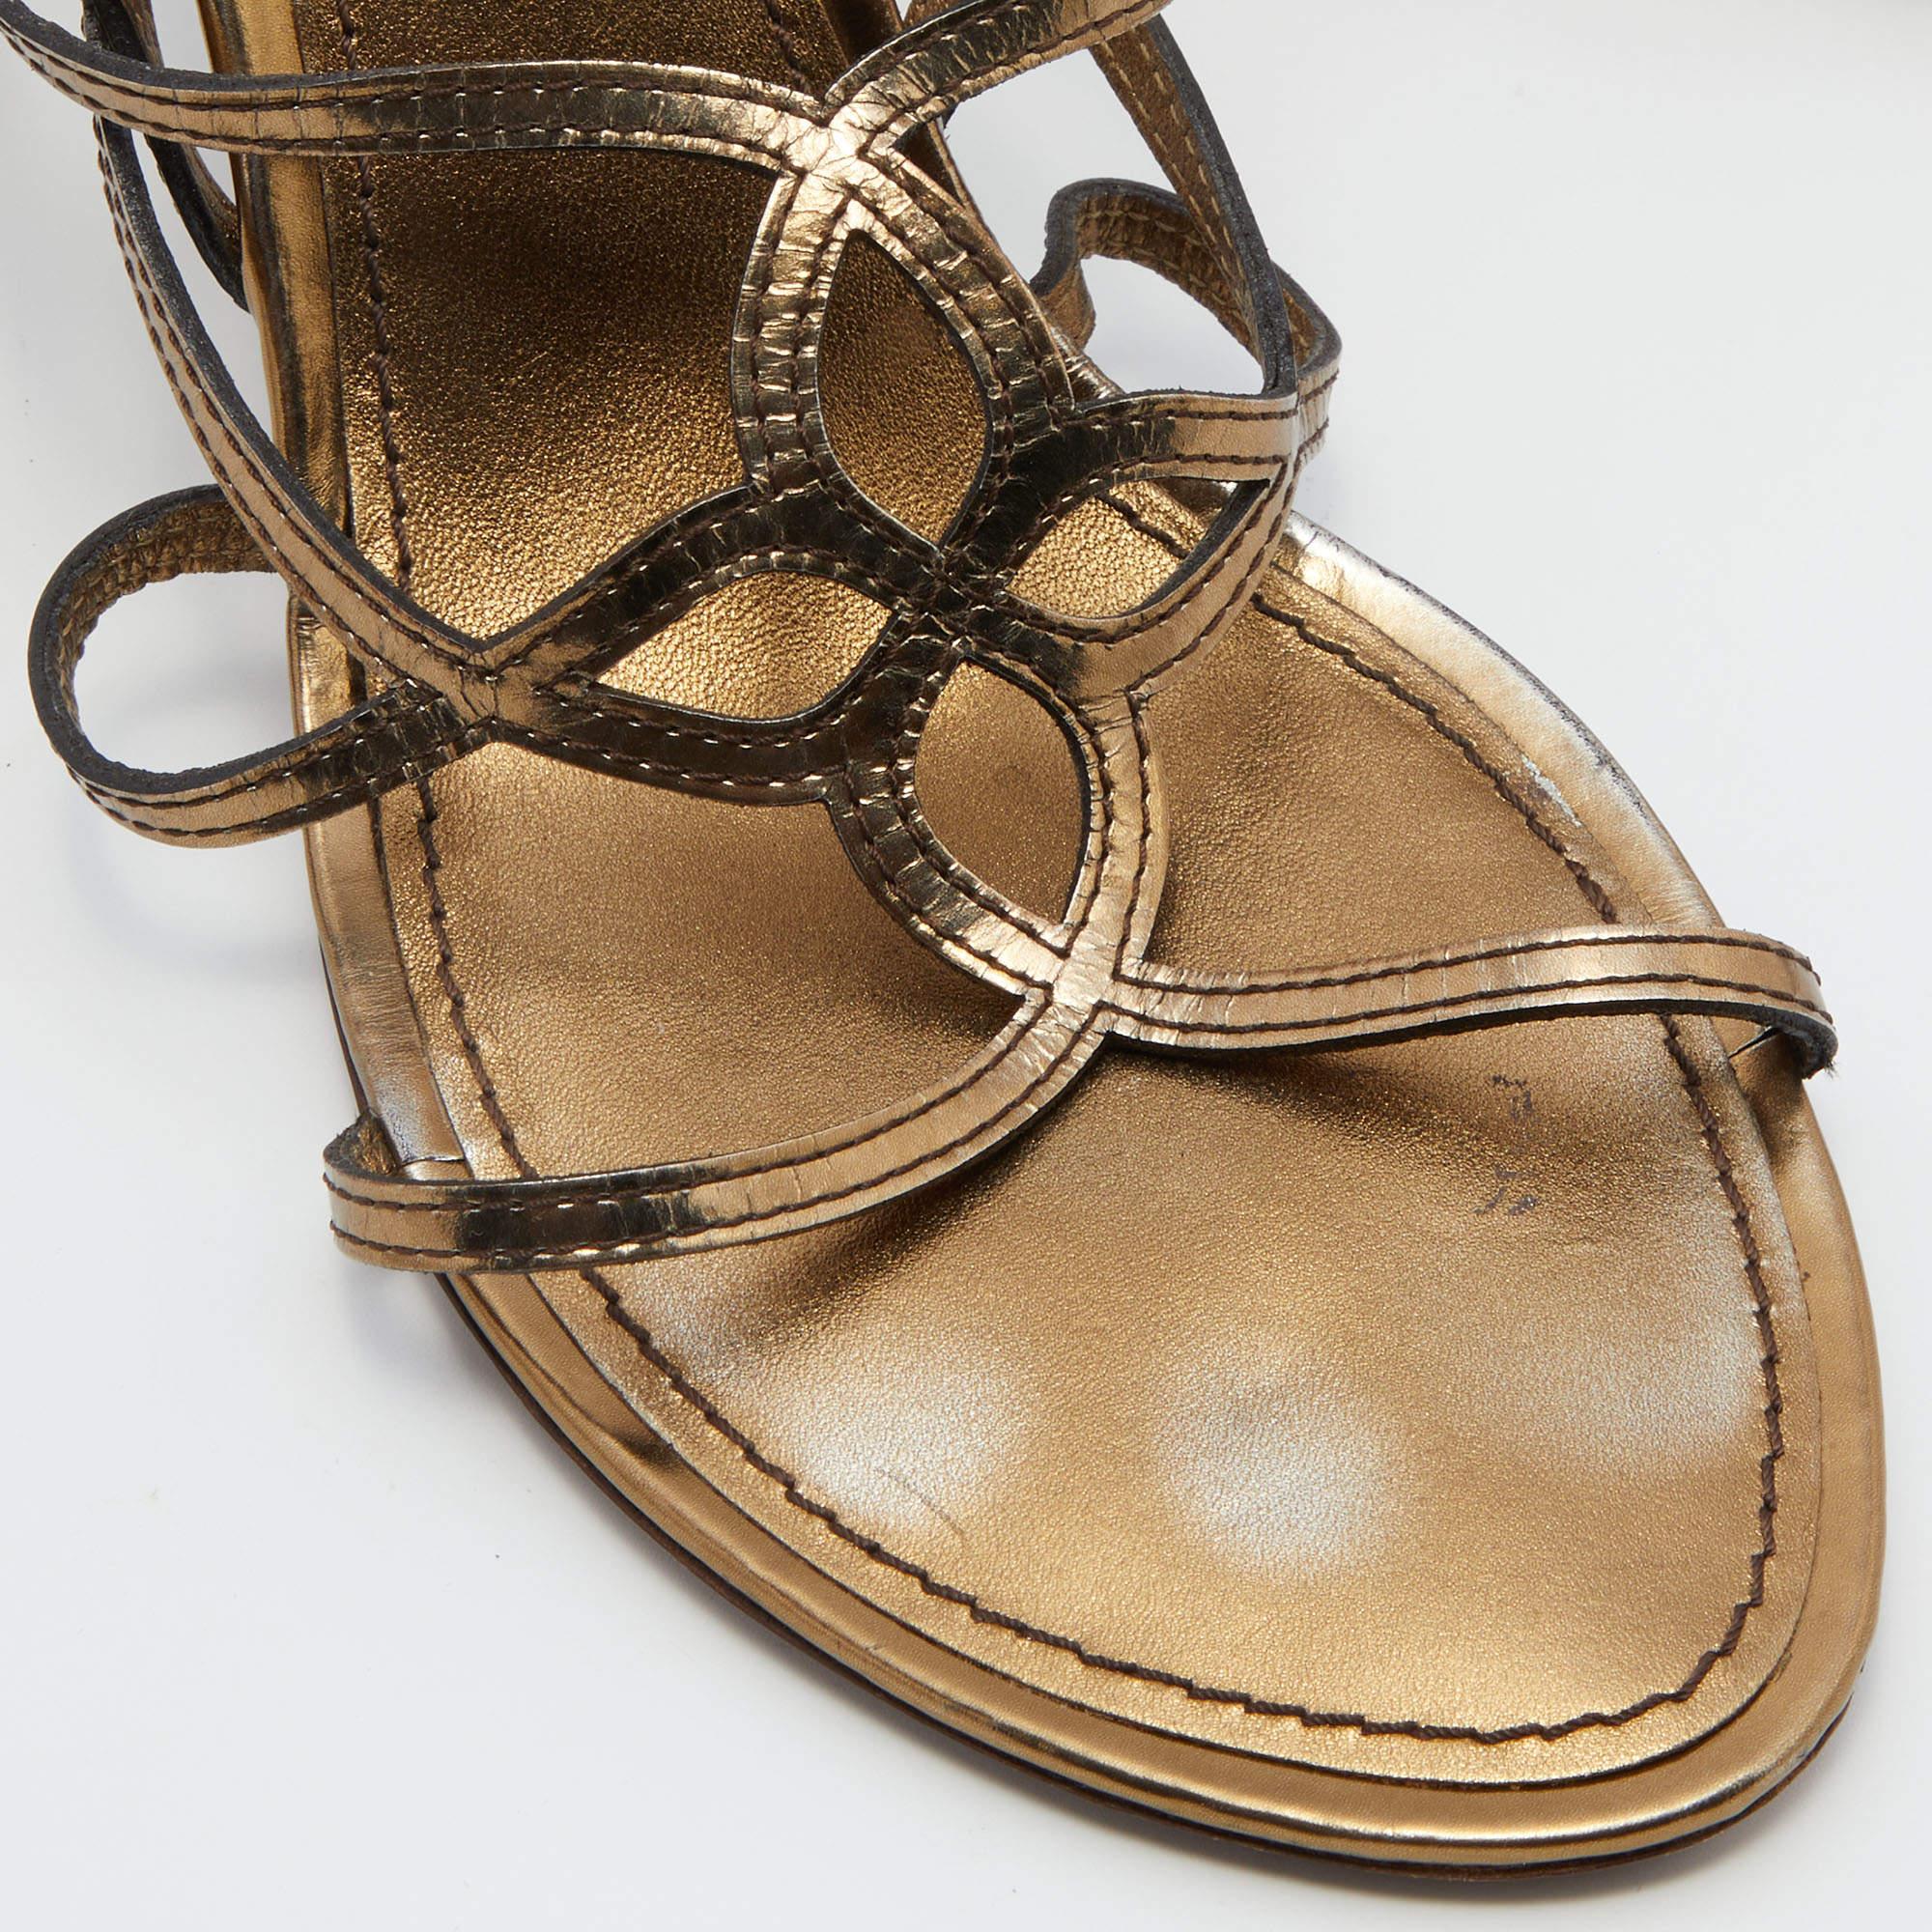 Louis Vuitton Metallic Gold Leather Strappy Sandals Size 42 4